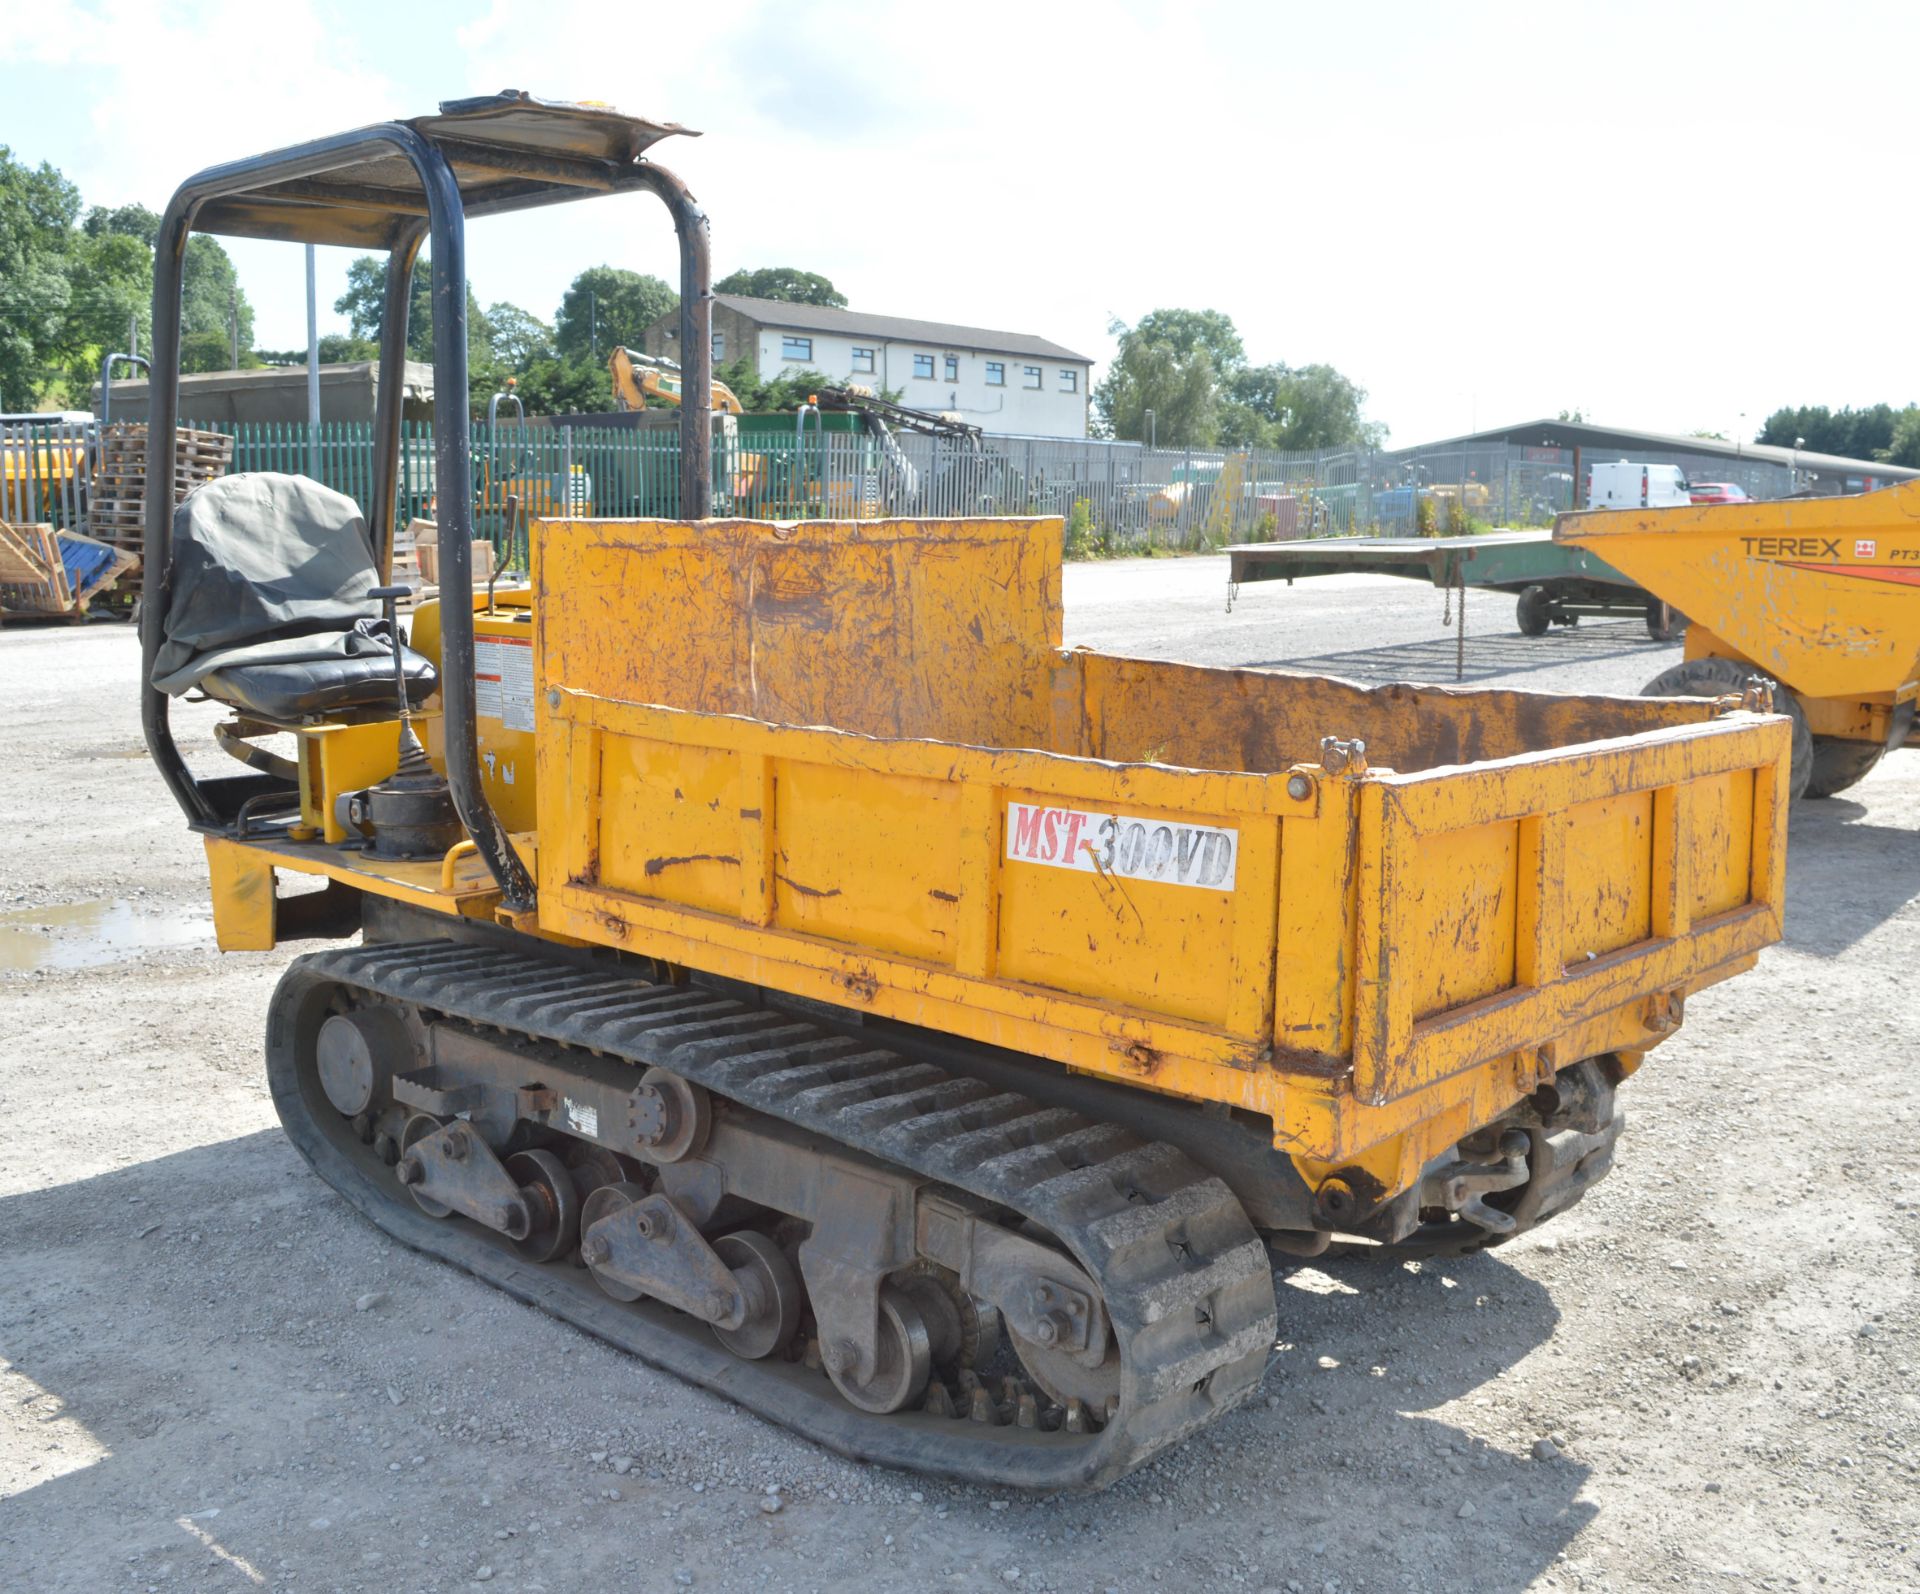 Morooka MST-300 VD rubber tracked straight skip dumper  S/N: 3320 Year: 2001 Recorded hours: 1408 - Image 9 of 9